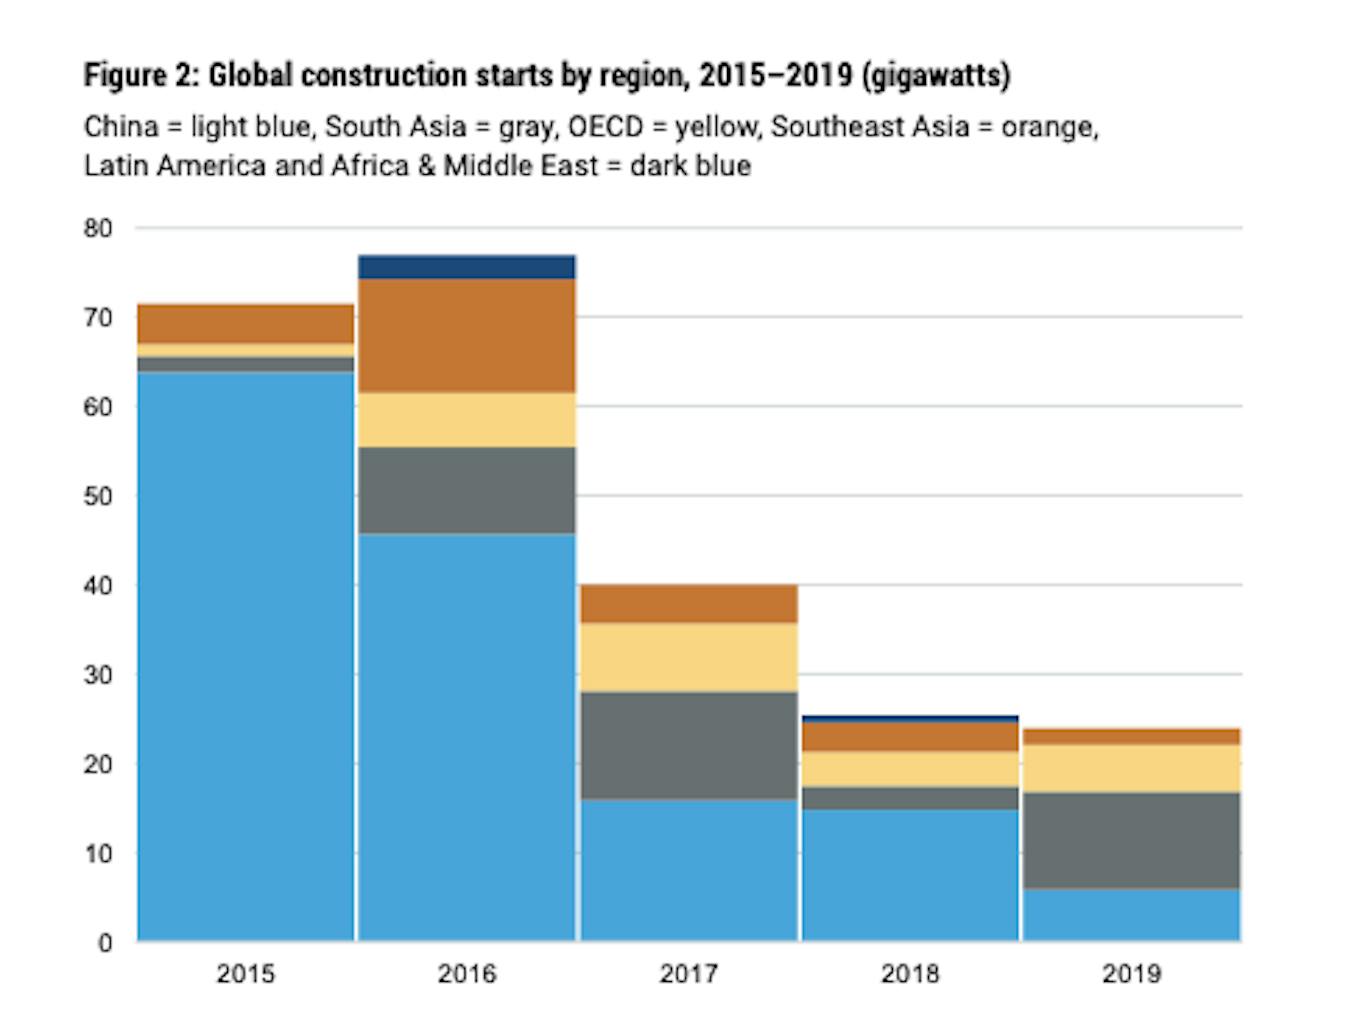 Global construction starts by region, 2015-2019. Source: Boom and Bust 2020: Tracking The Global Coal Plant Pipeline